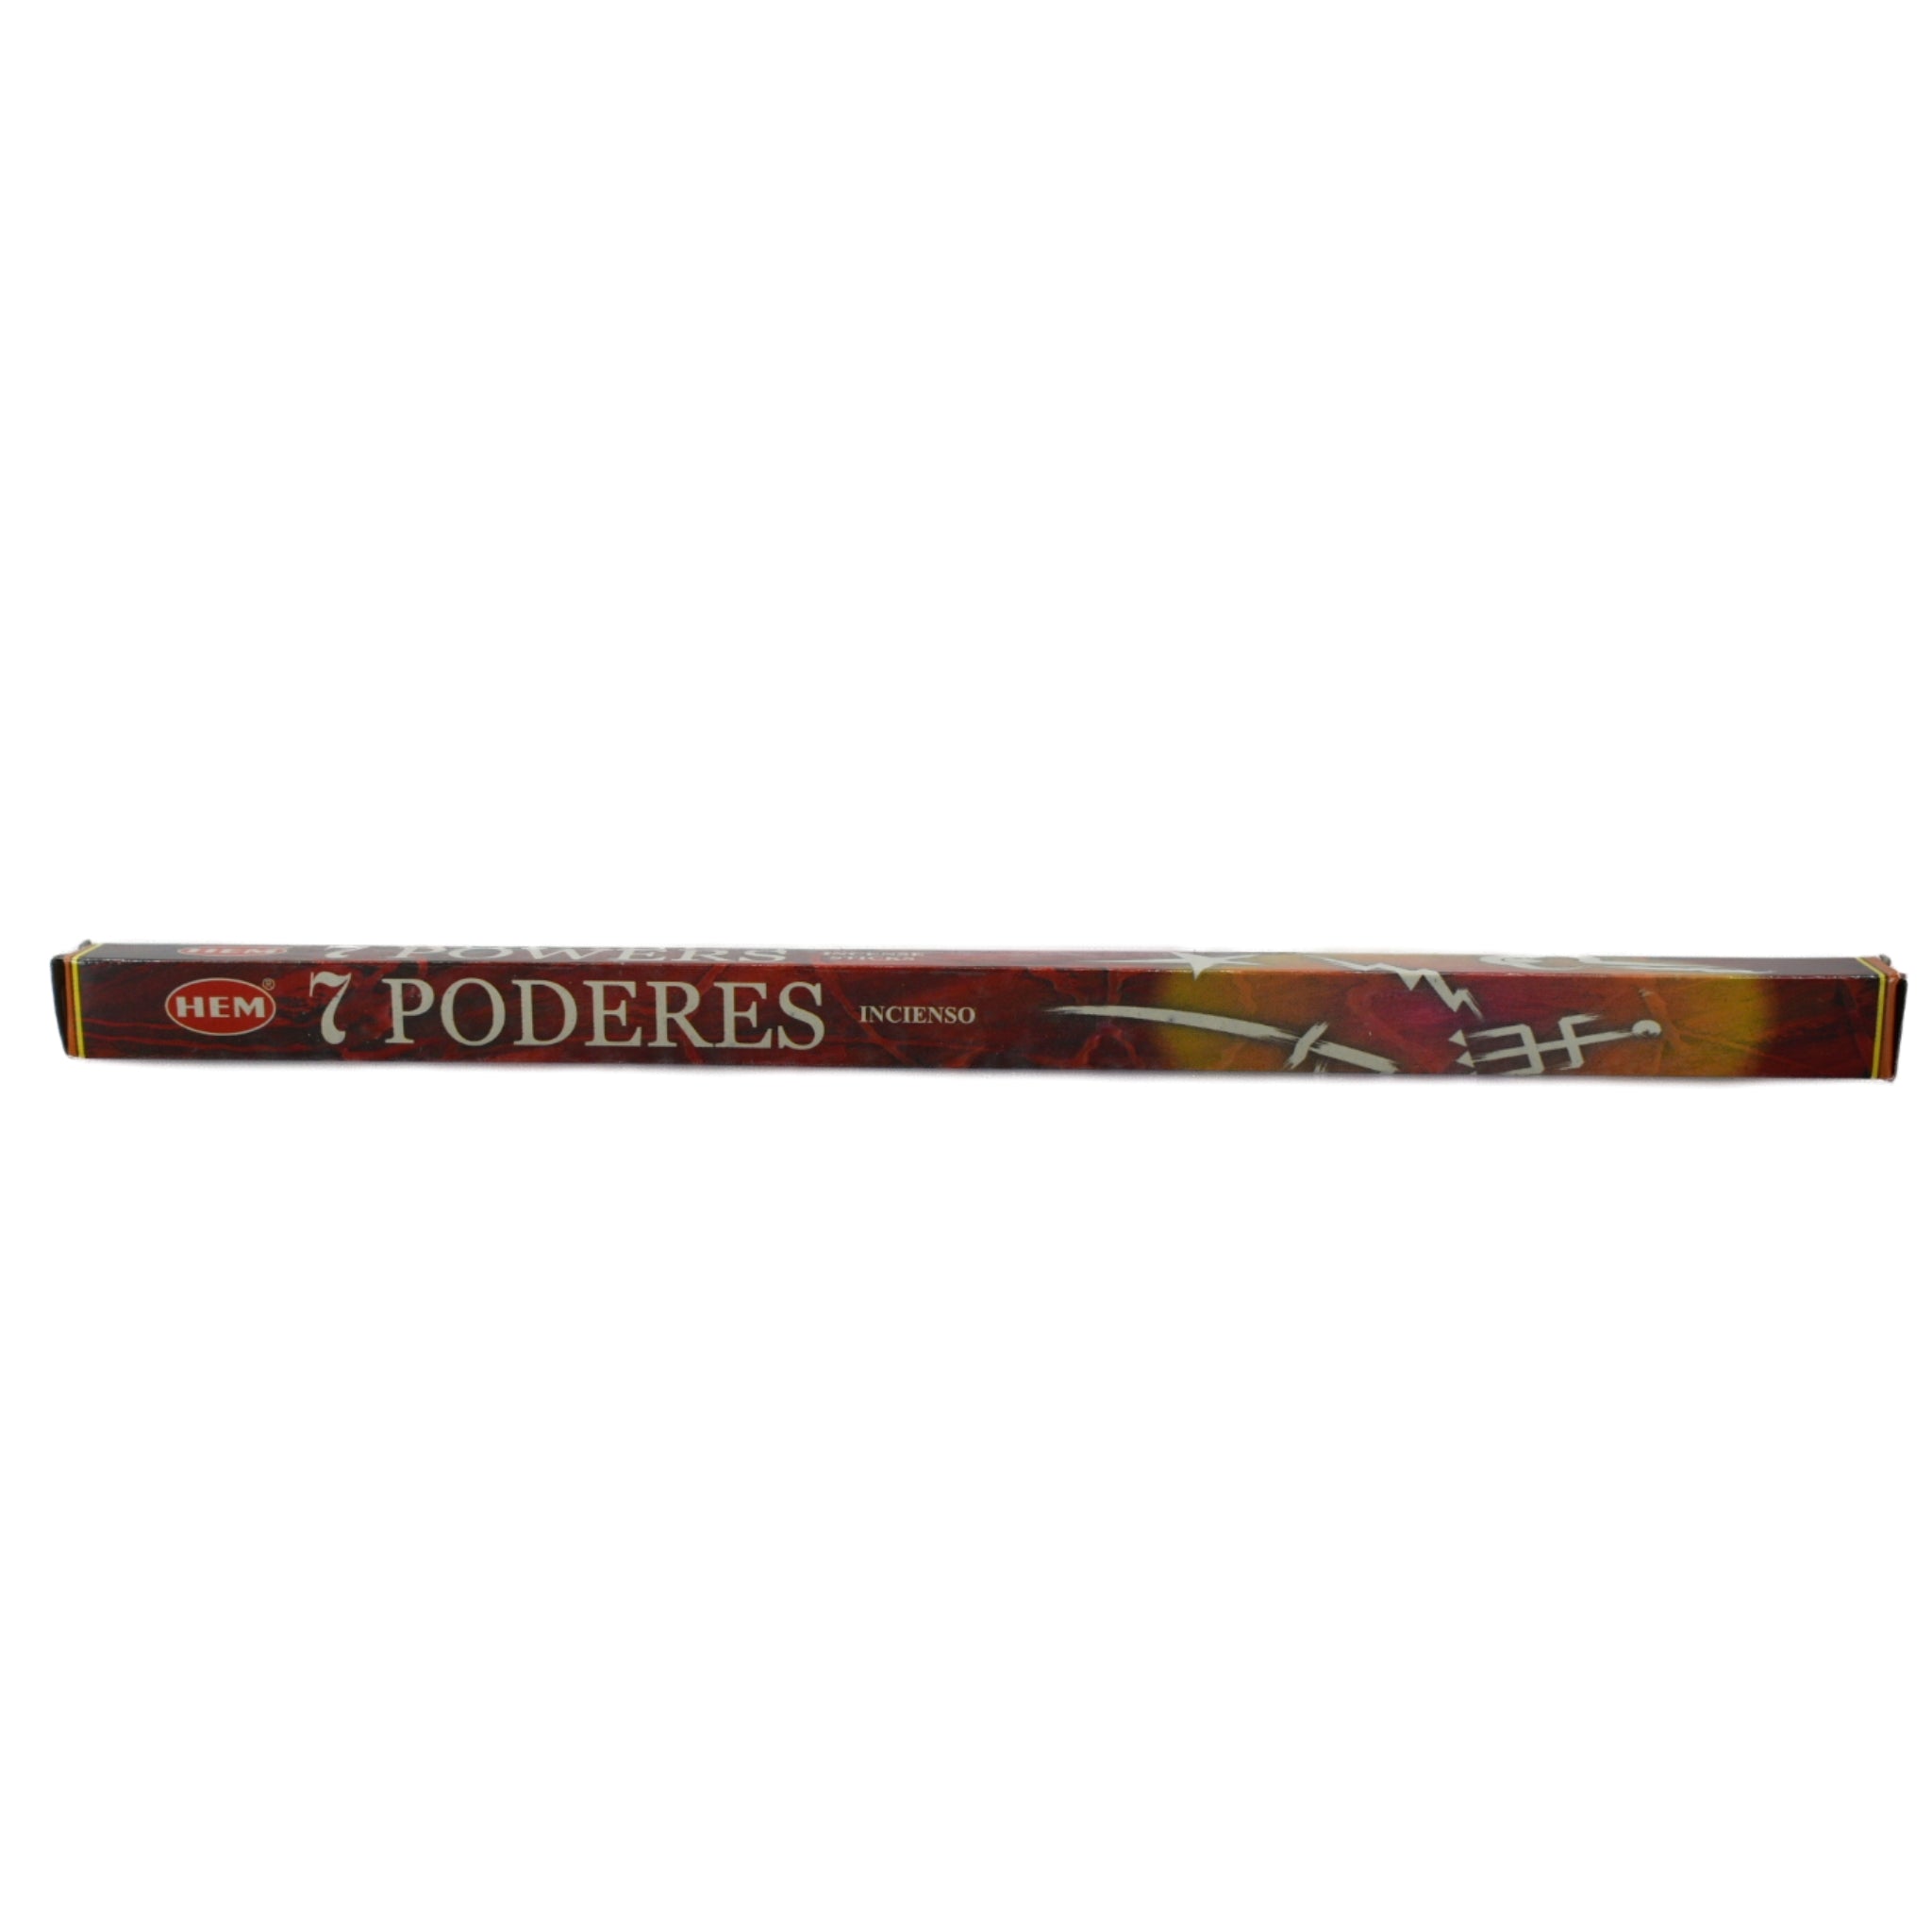 7 Powers Incense Sticks.  Contains 8 incense sticks each 9&quot; long that burns for 30 minutes. Hand rolled made in India.  Brown package. Helps with perception, free will, setting intentions.  